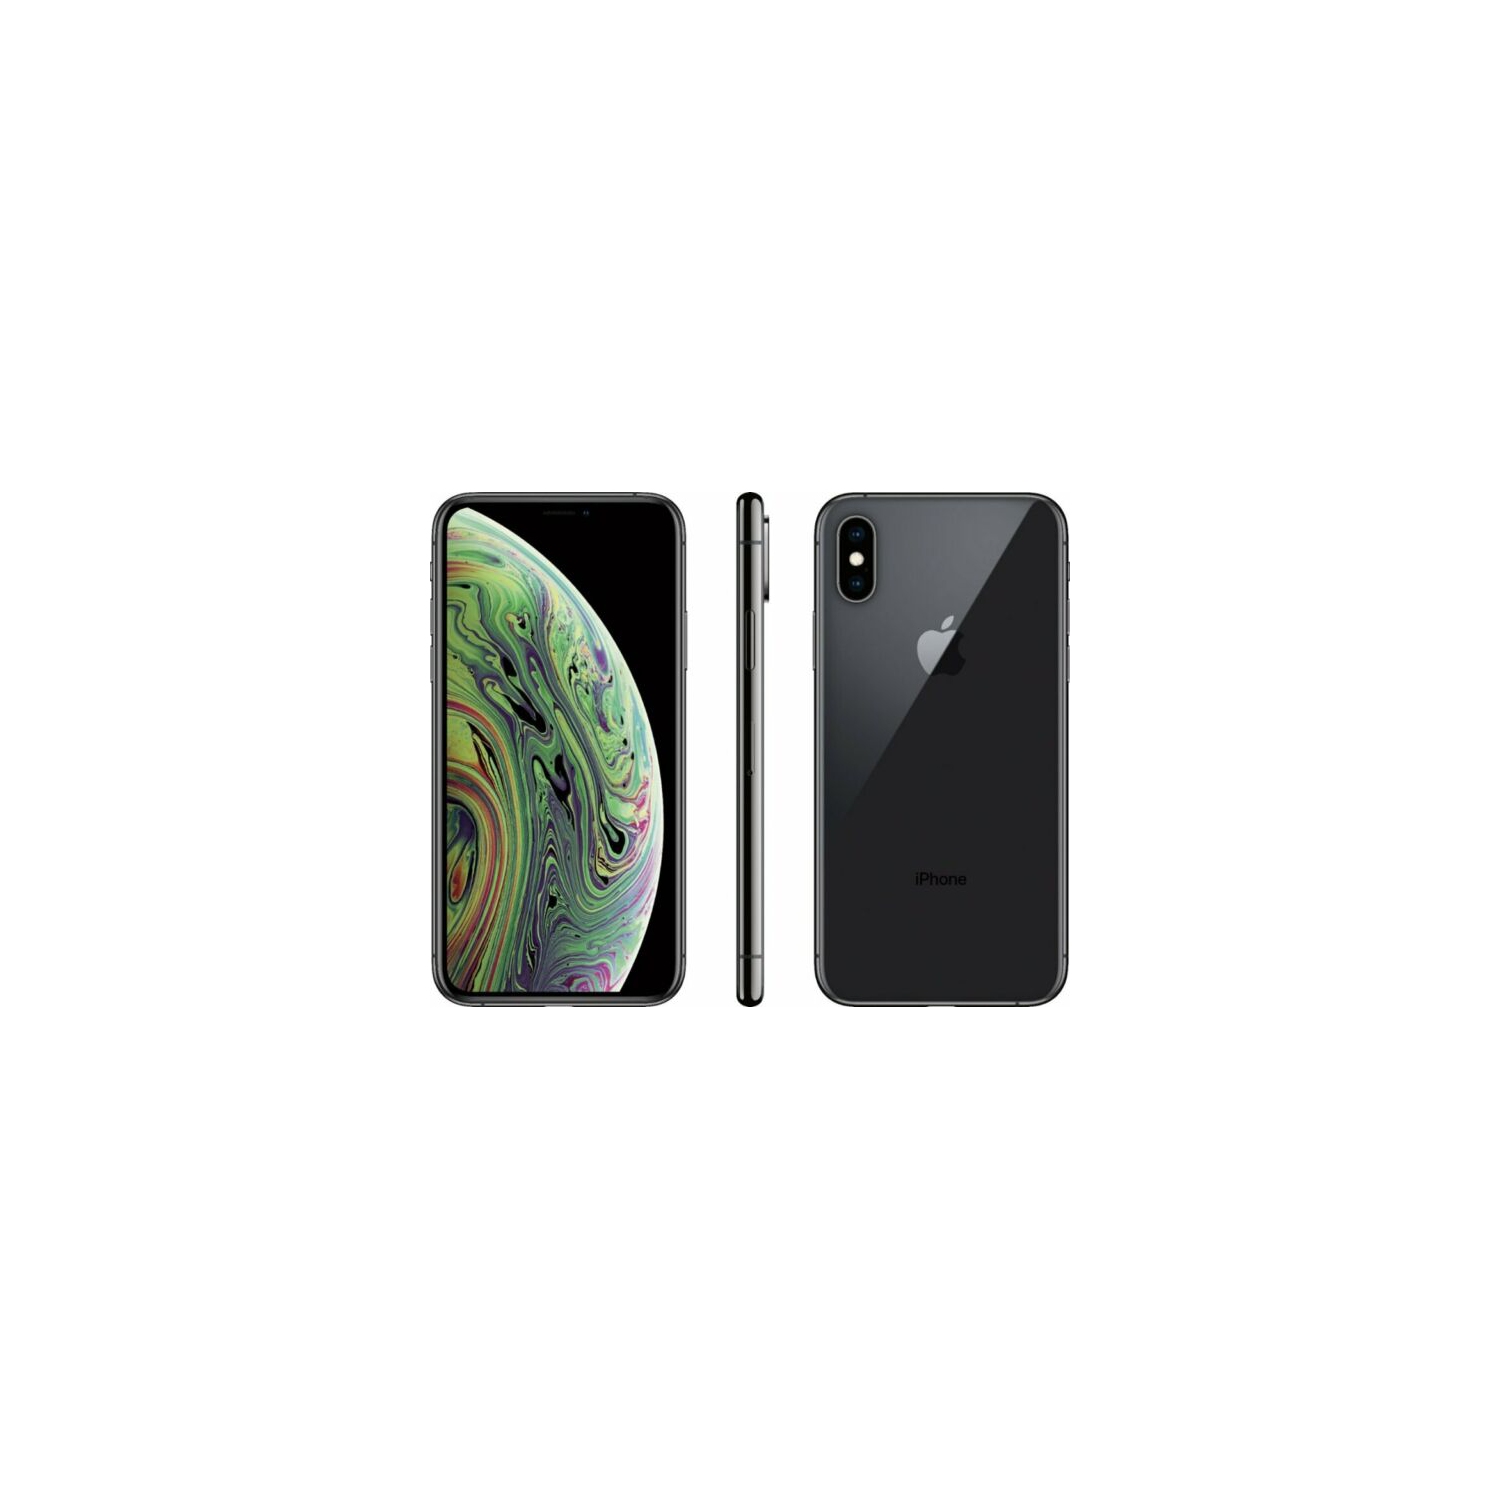 Refurbished (Good) Apple iPhone XS Max A1921 (Fully Unlocked) 64GB Space Gray